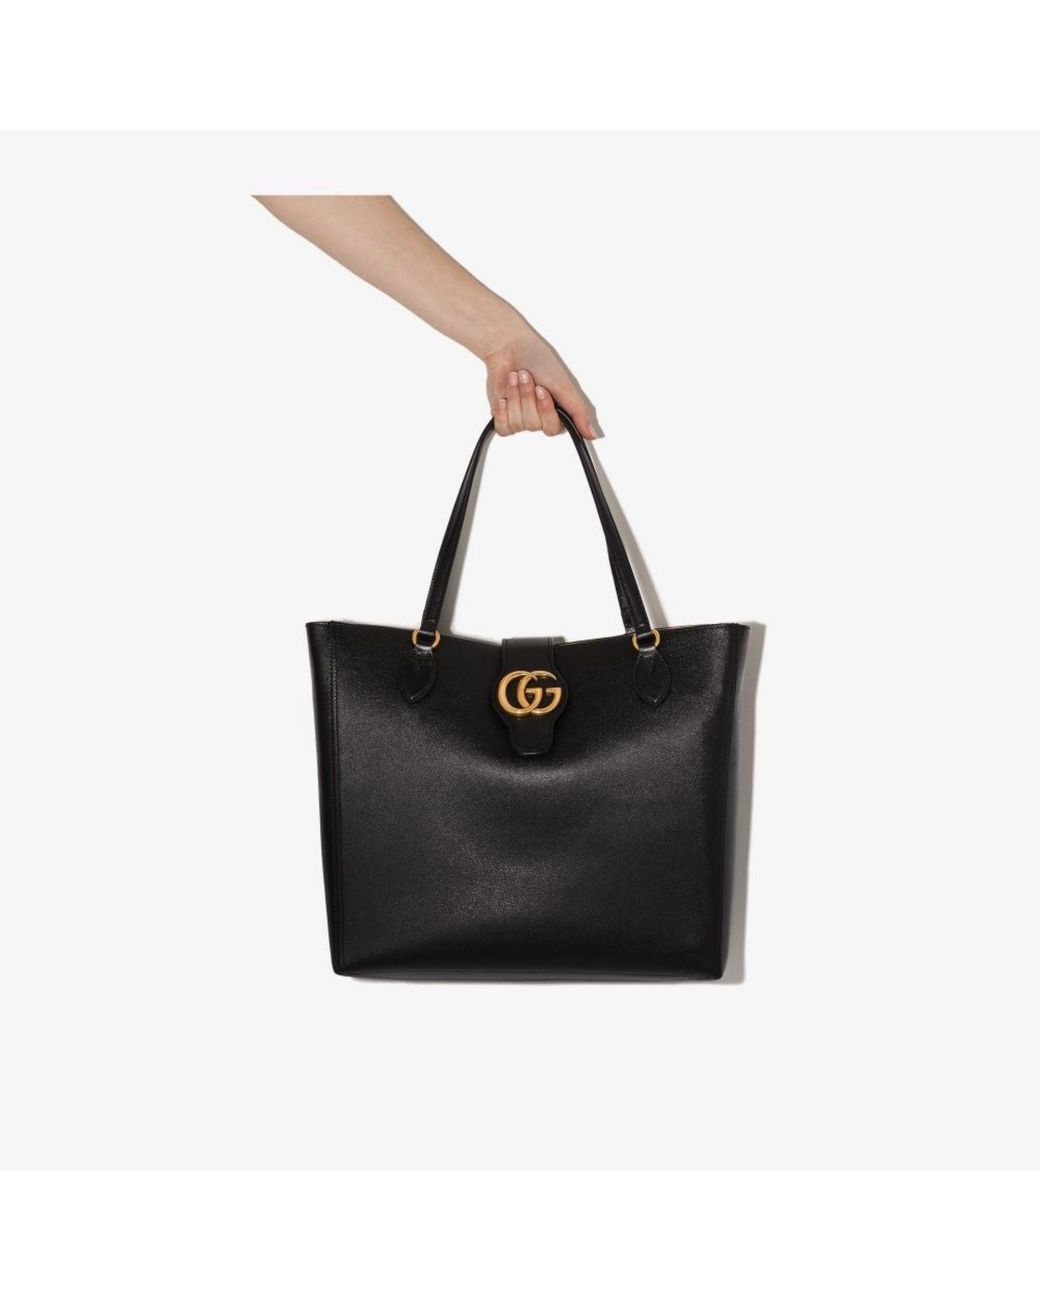 Gucci Medium Double G Tote Bag in Black | Lyst